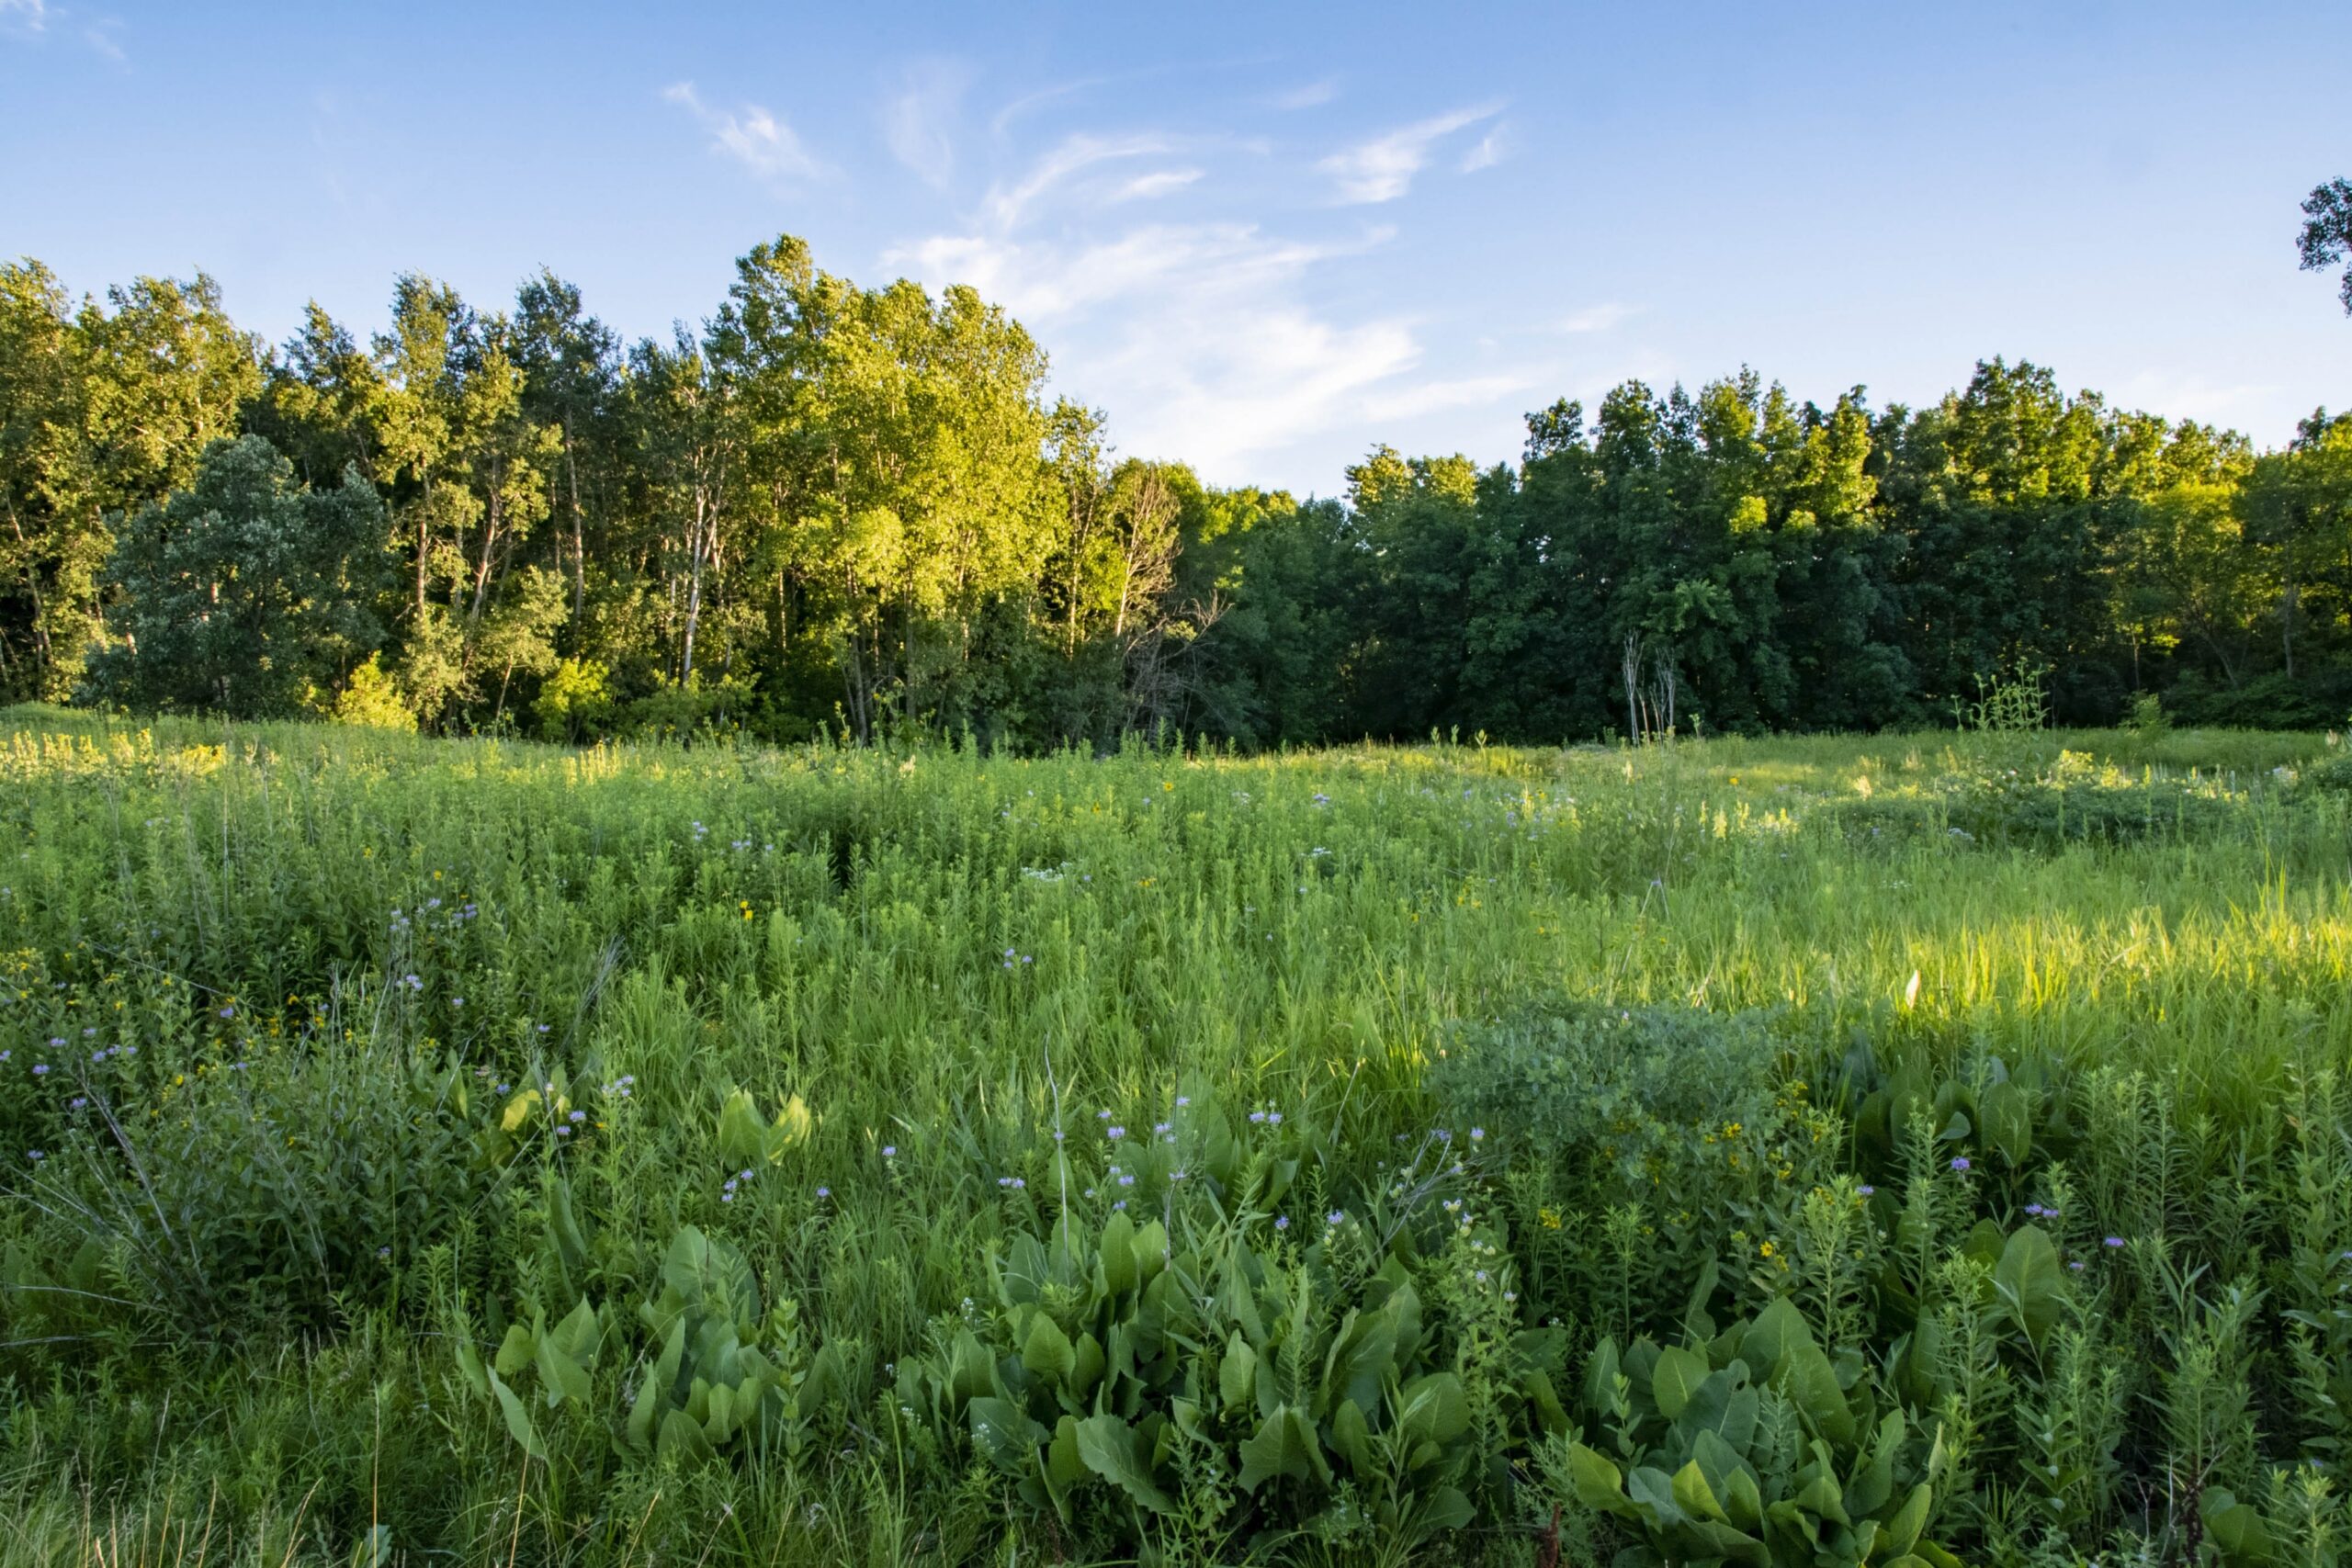 The Keith White Prairie is located on the University of Wisconsin-Green Bay campus in the Cofrin Memorial Arboretum